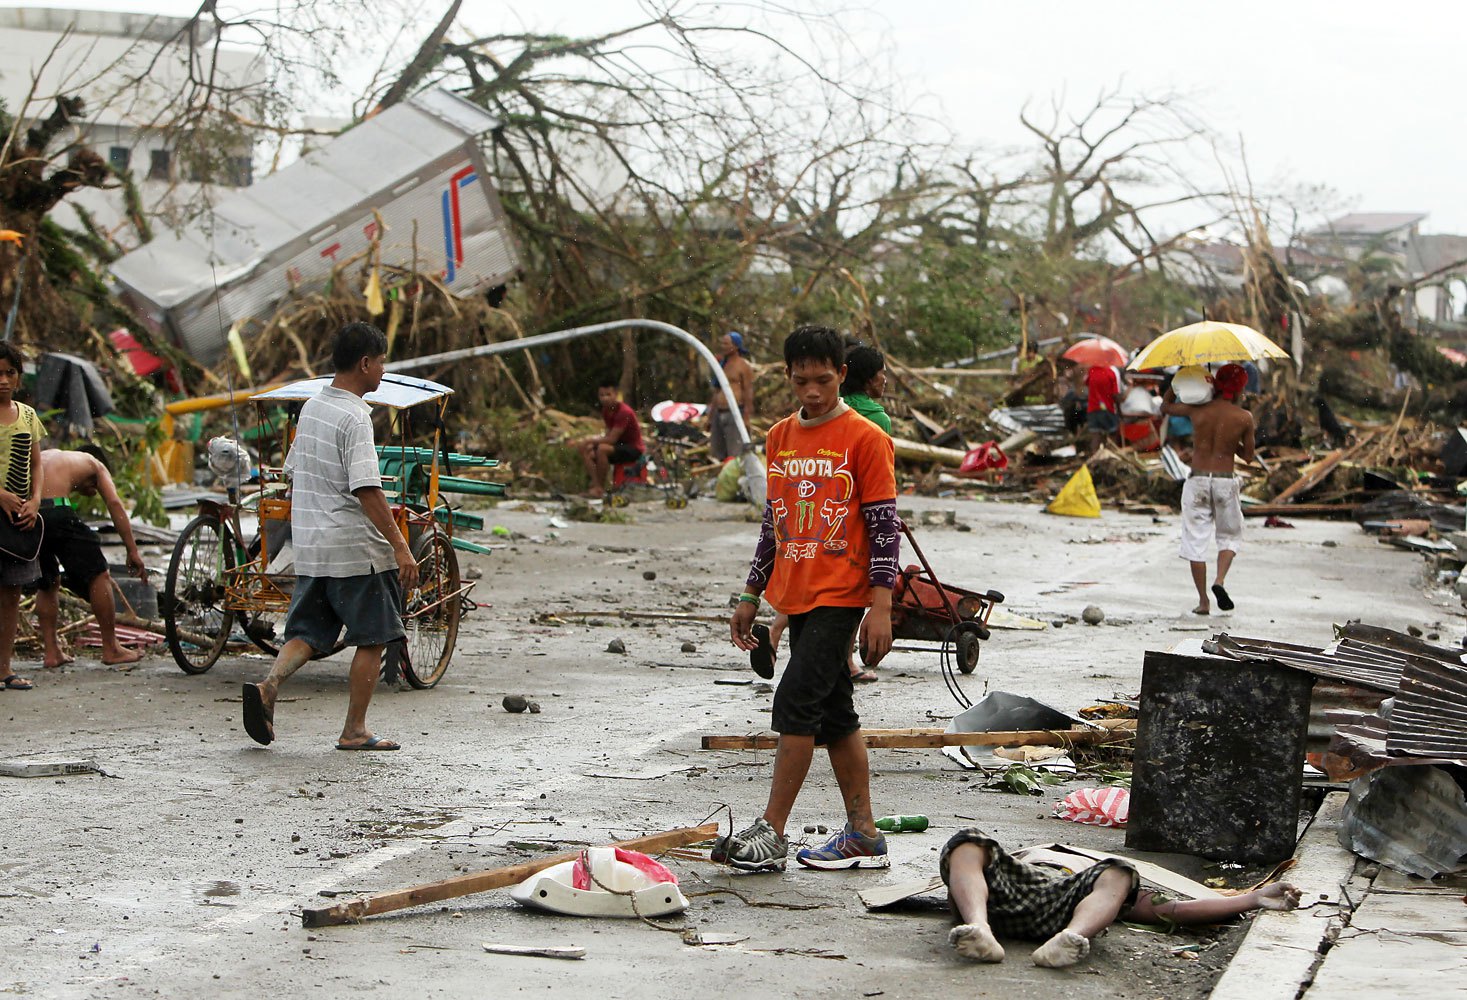 Filipinos walk past a victim left on the side of a street in the typhoon-devastated city of Tacloban, in the Philippines' Leyte province, on Nov. 9, 2013